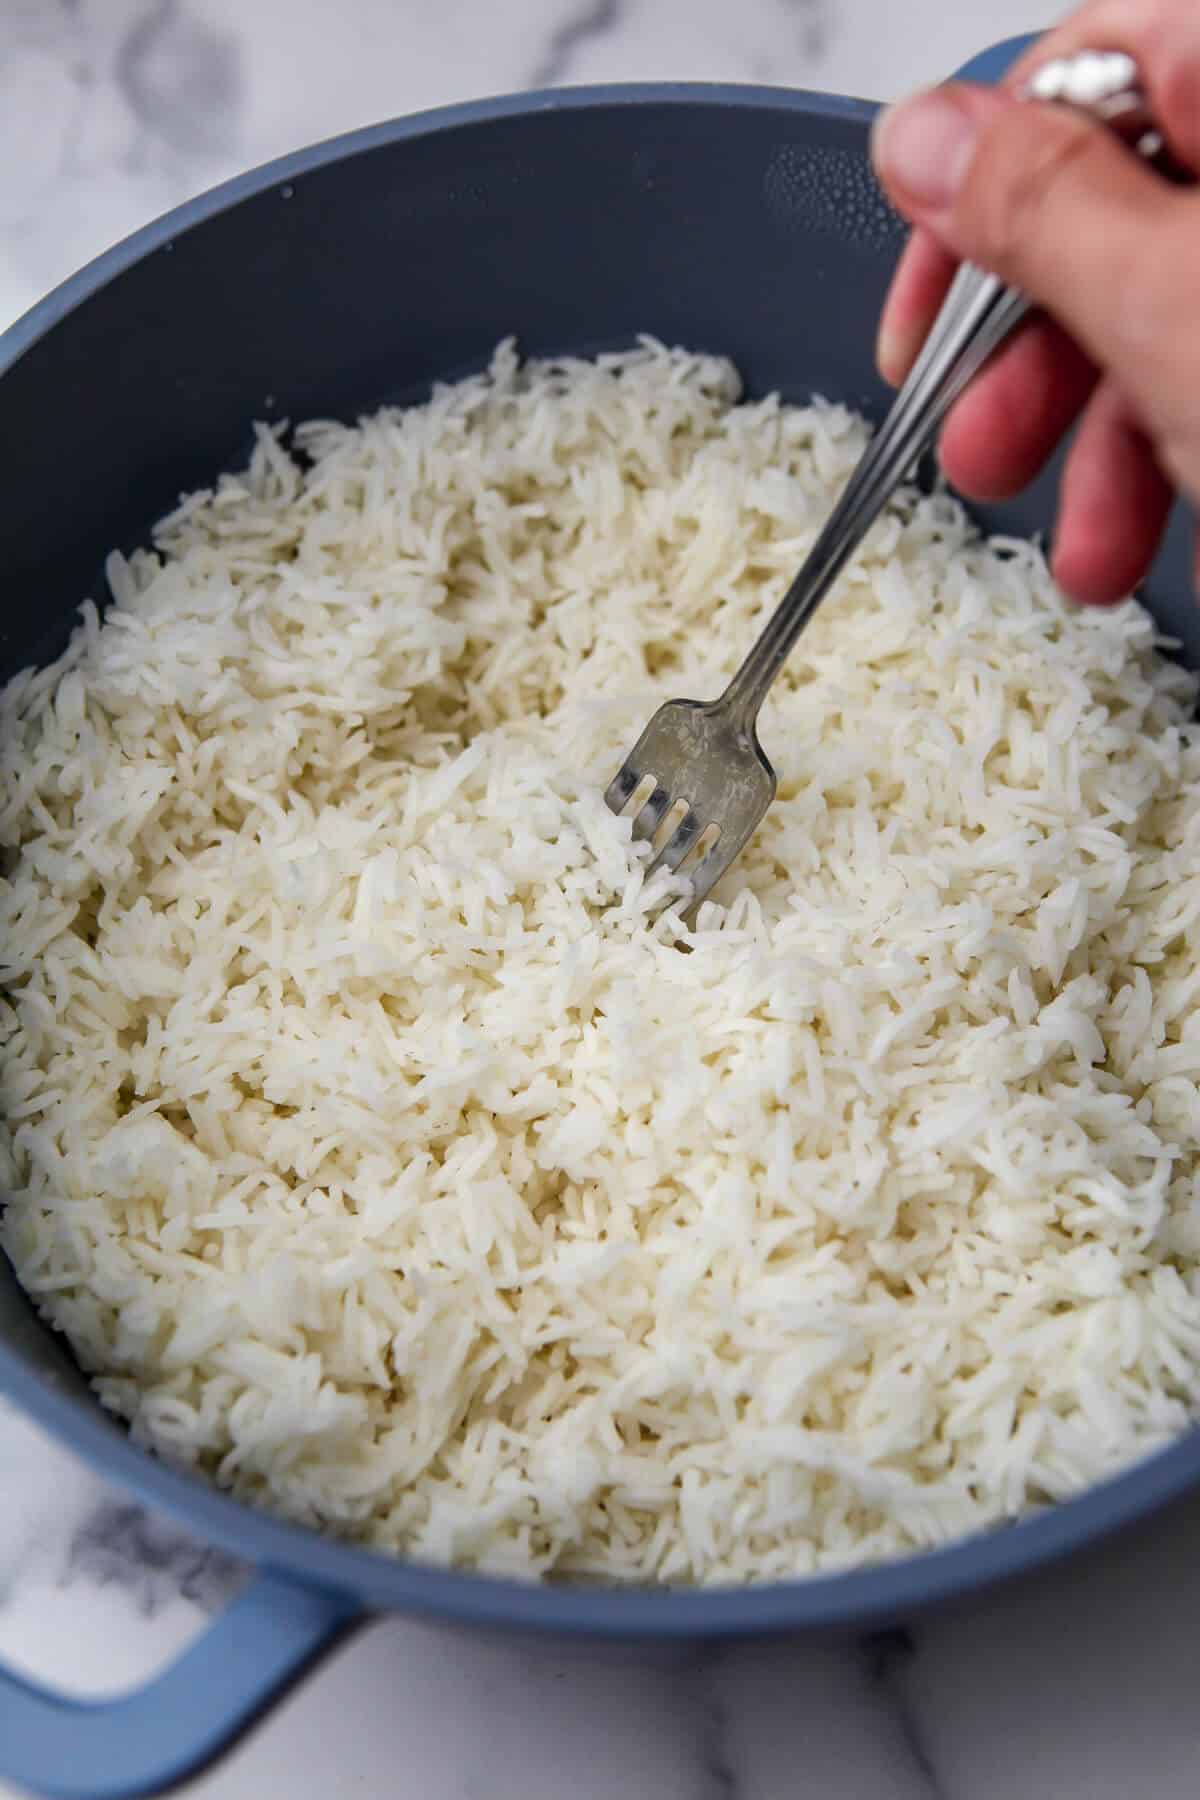 Fluffing Basmati rice with a fork after cooking.